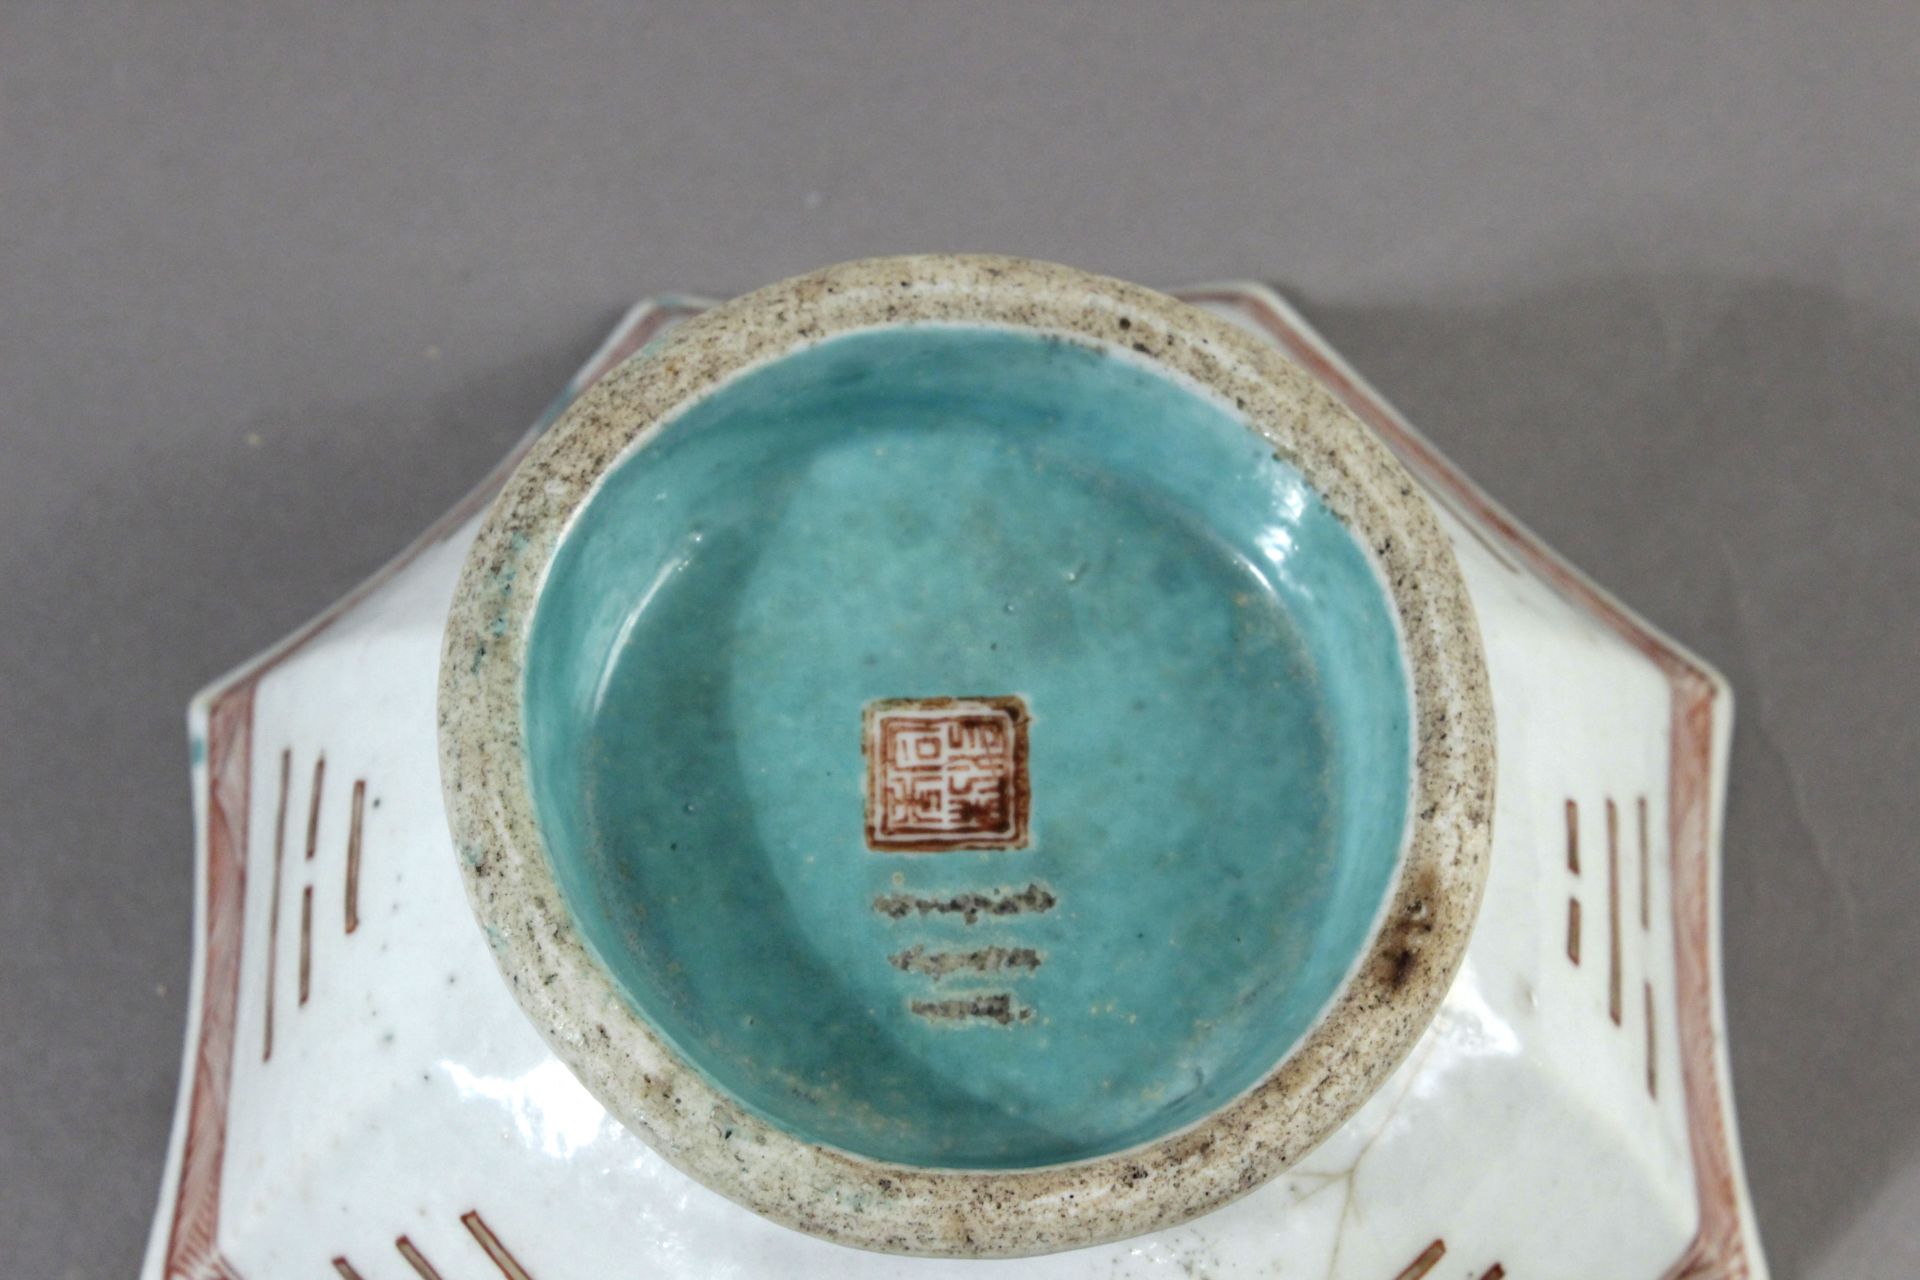 A late 19th century Chinese fruit bowl in celadon porcelain from Qing dynasty period - Image 4 of 4